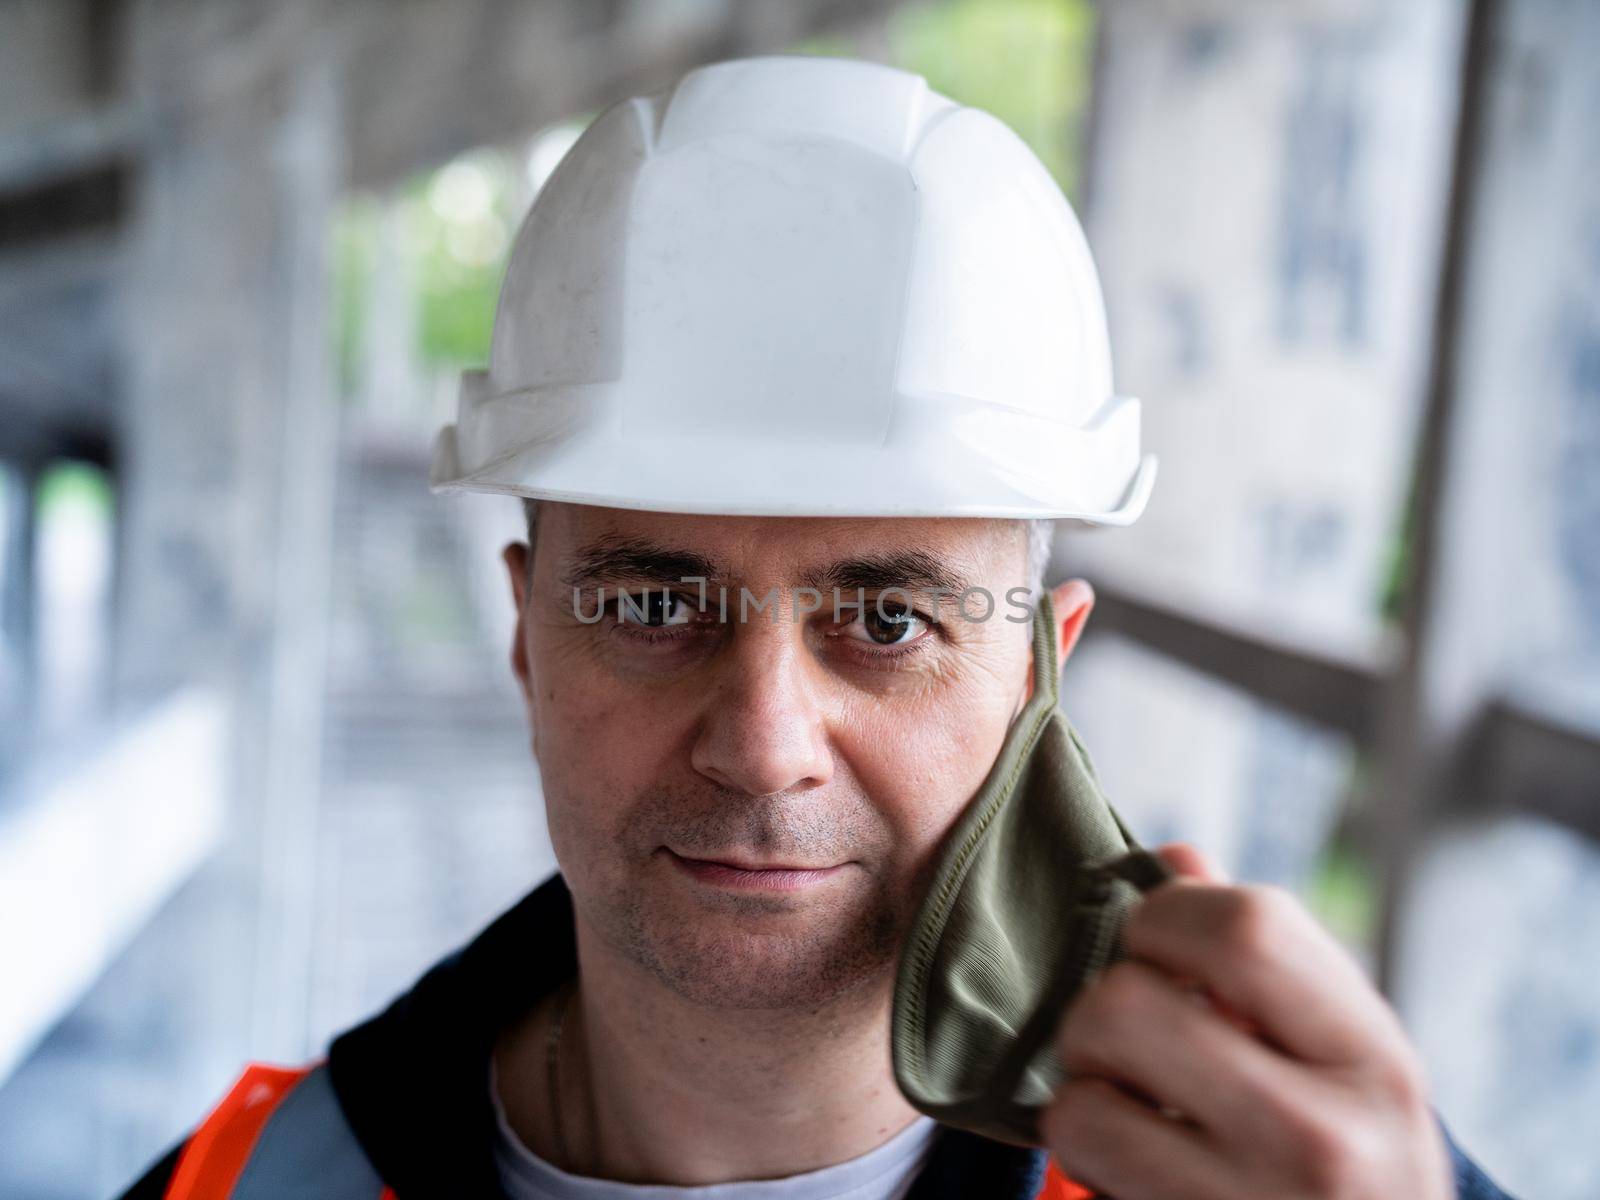 The man removes the protective mask from his face to symbolize the end of the pandemic. Portrait of a male Builder in a construction helmet and a medical antiviral mask.